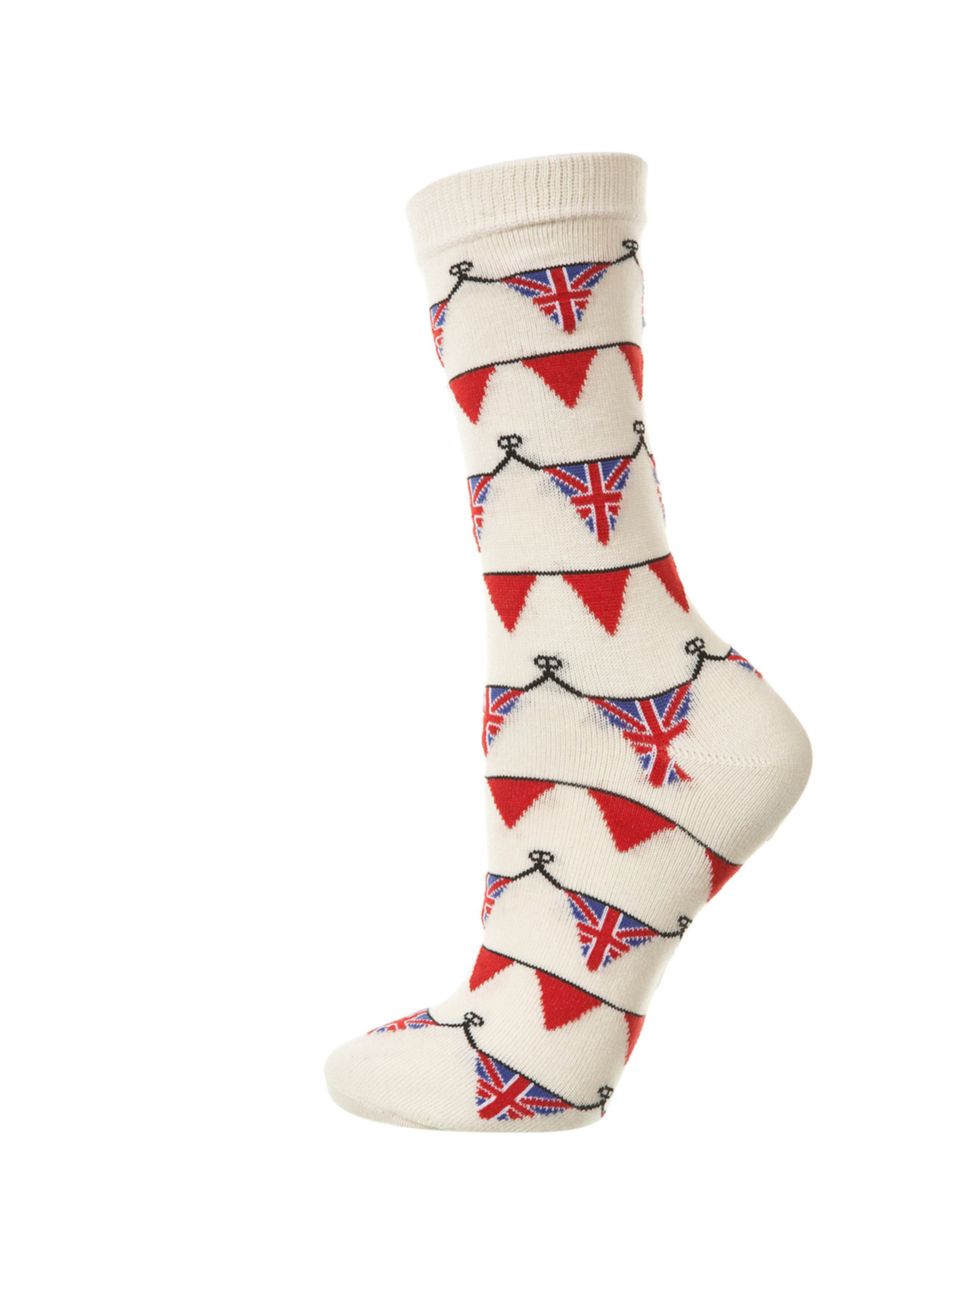 <p>Topshop Jubilee bunting socks, £3.50</p><p><a href="http://shopping.elleuk.com/browse?fts=topshop+bunting+socks">BUY NOW</a></p>